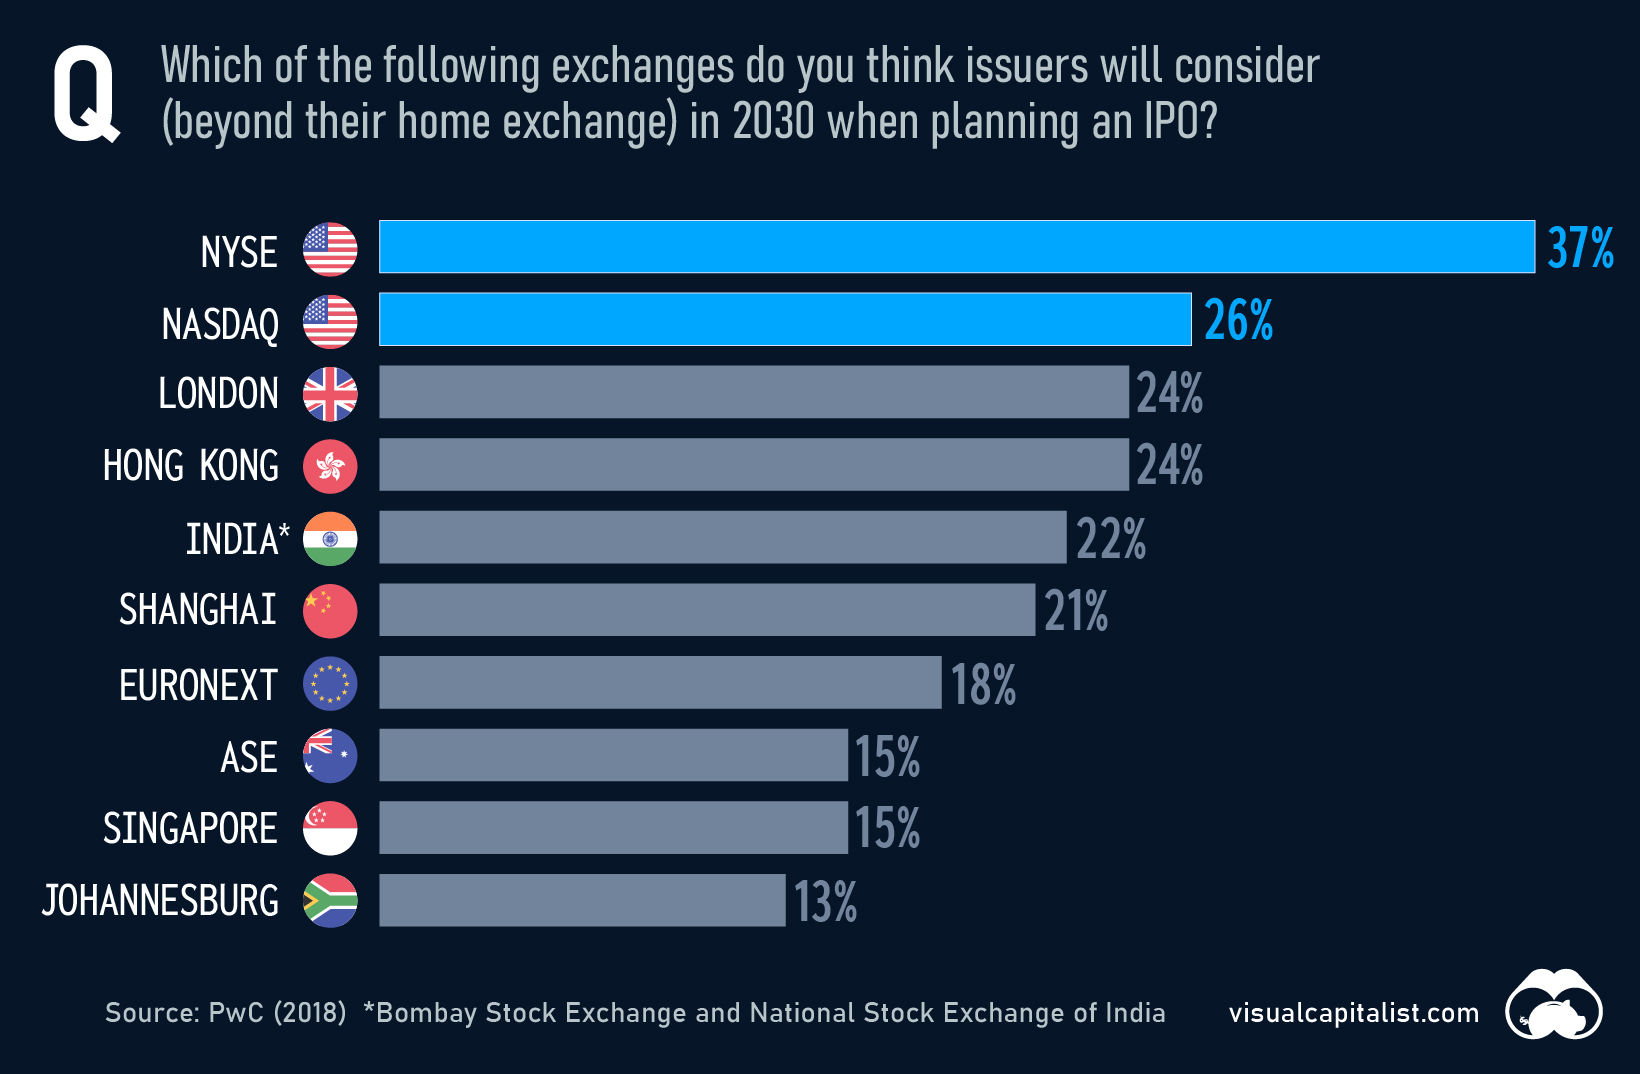 Survey of market participants that shows which exchanges could be preferred for an IPO in 2030